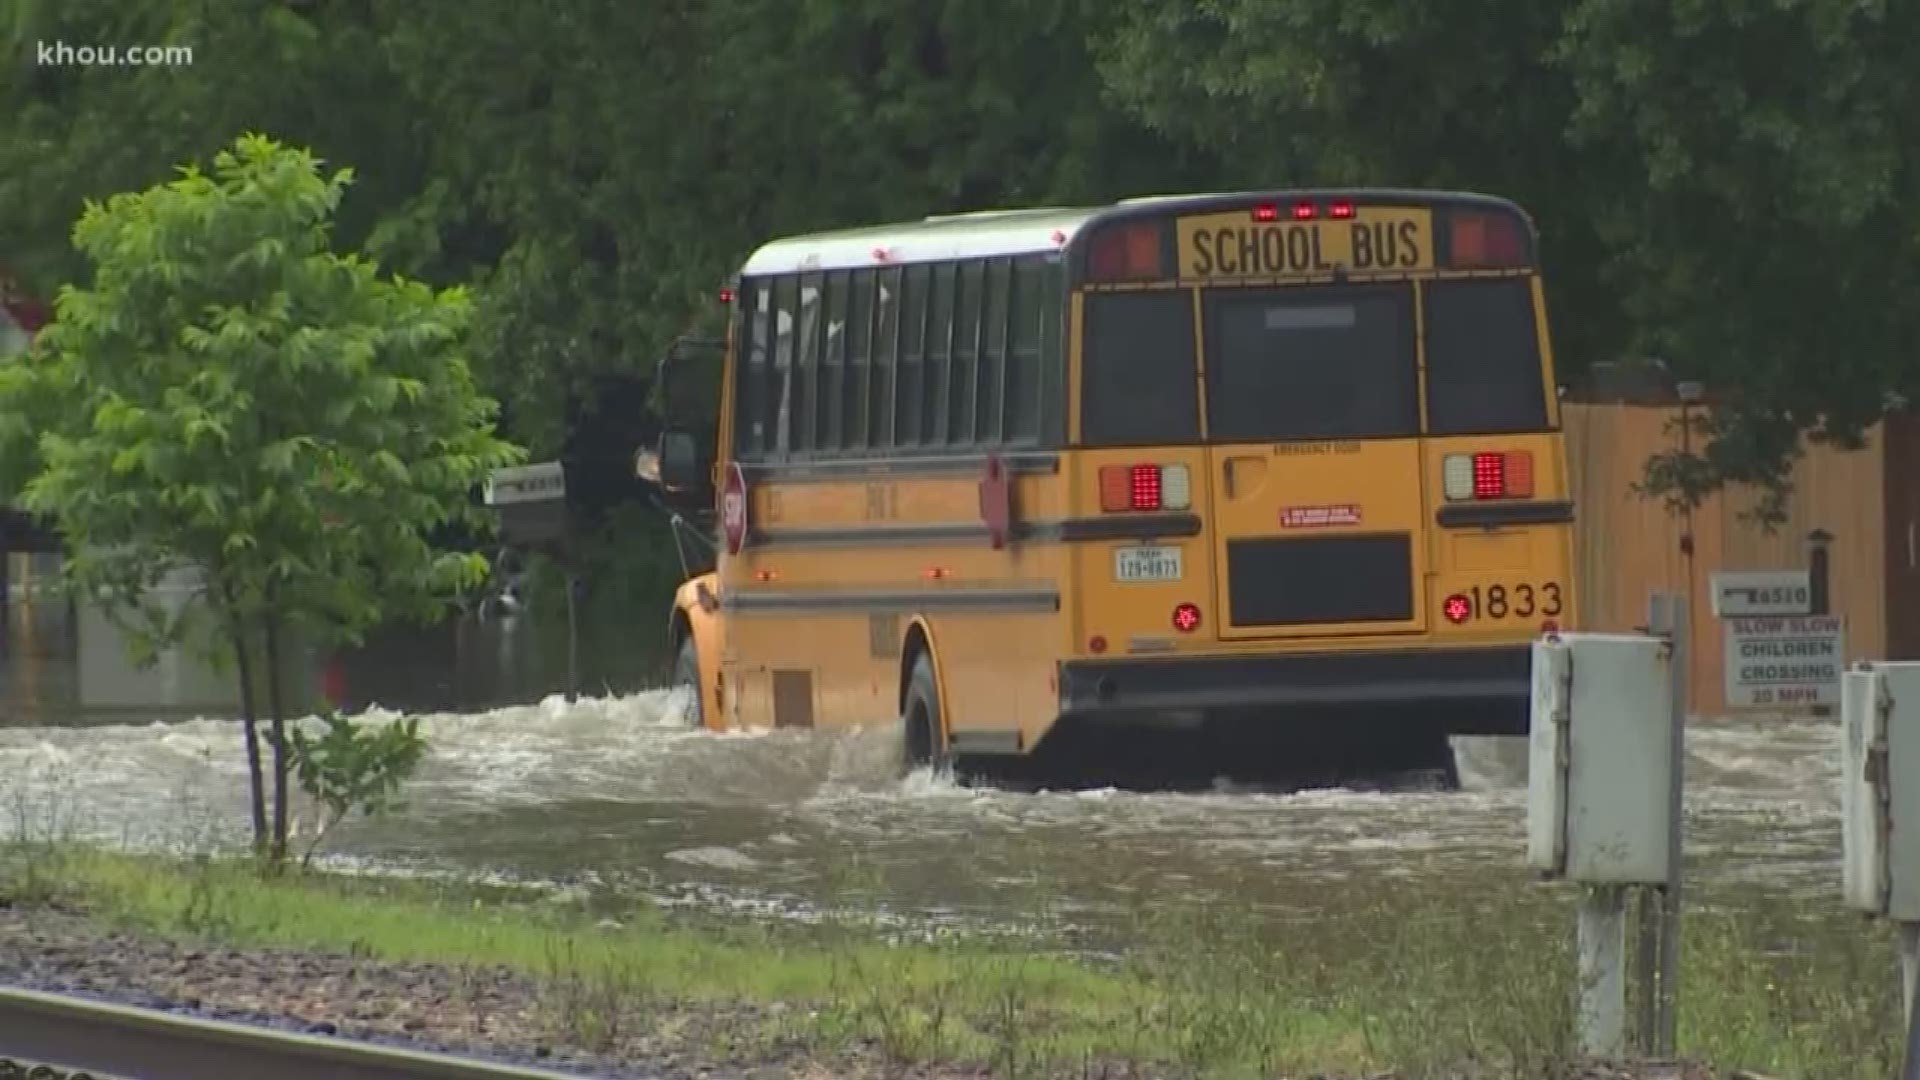 During Tuesday's severe weather, we saw several situations where school buses drove through high water. A Spring ISD school bus, with students on board, got stuck in the floods. No one was injured.